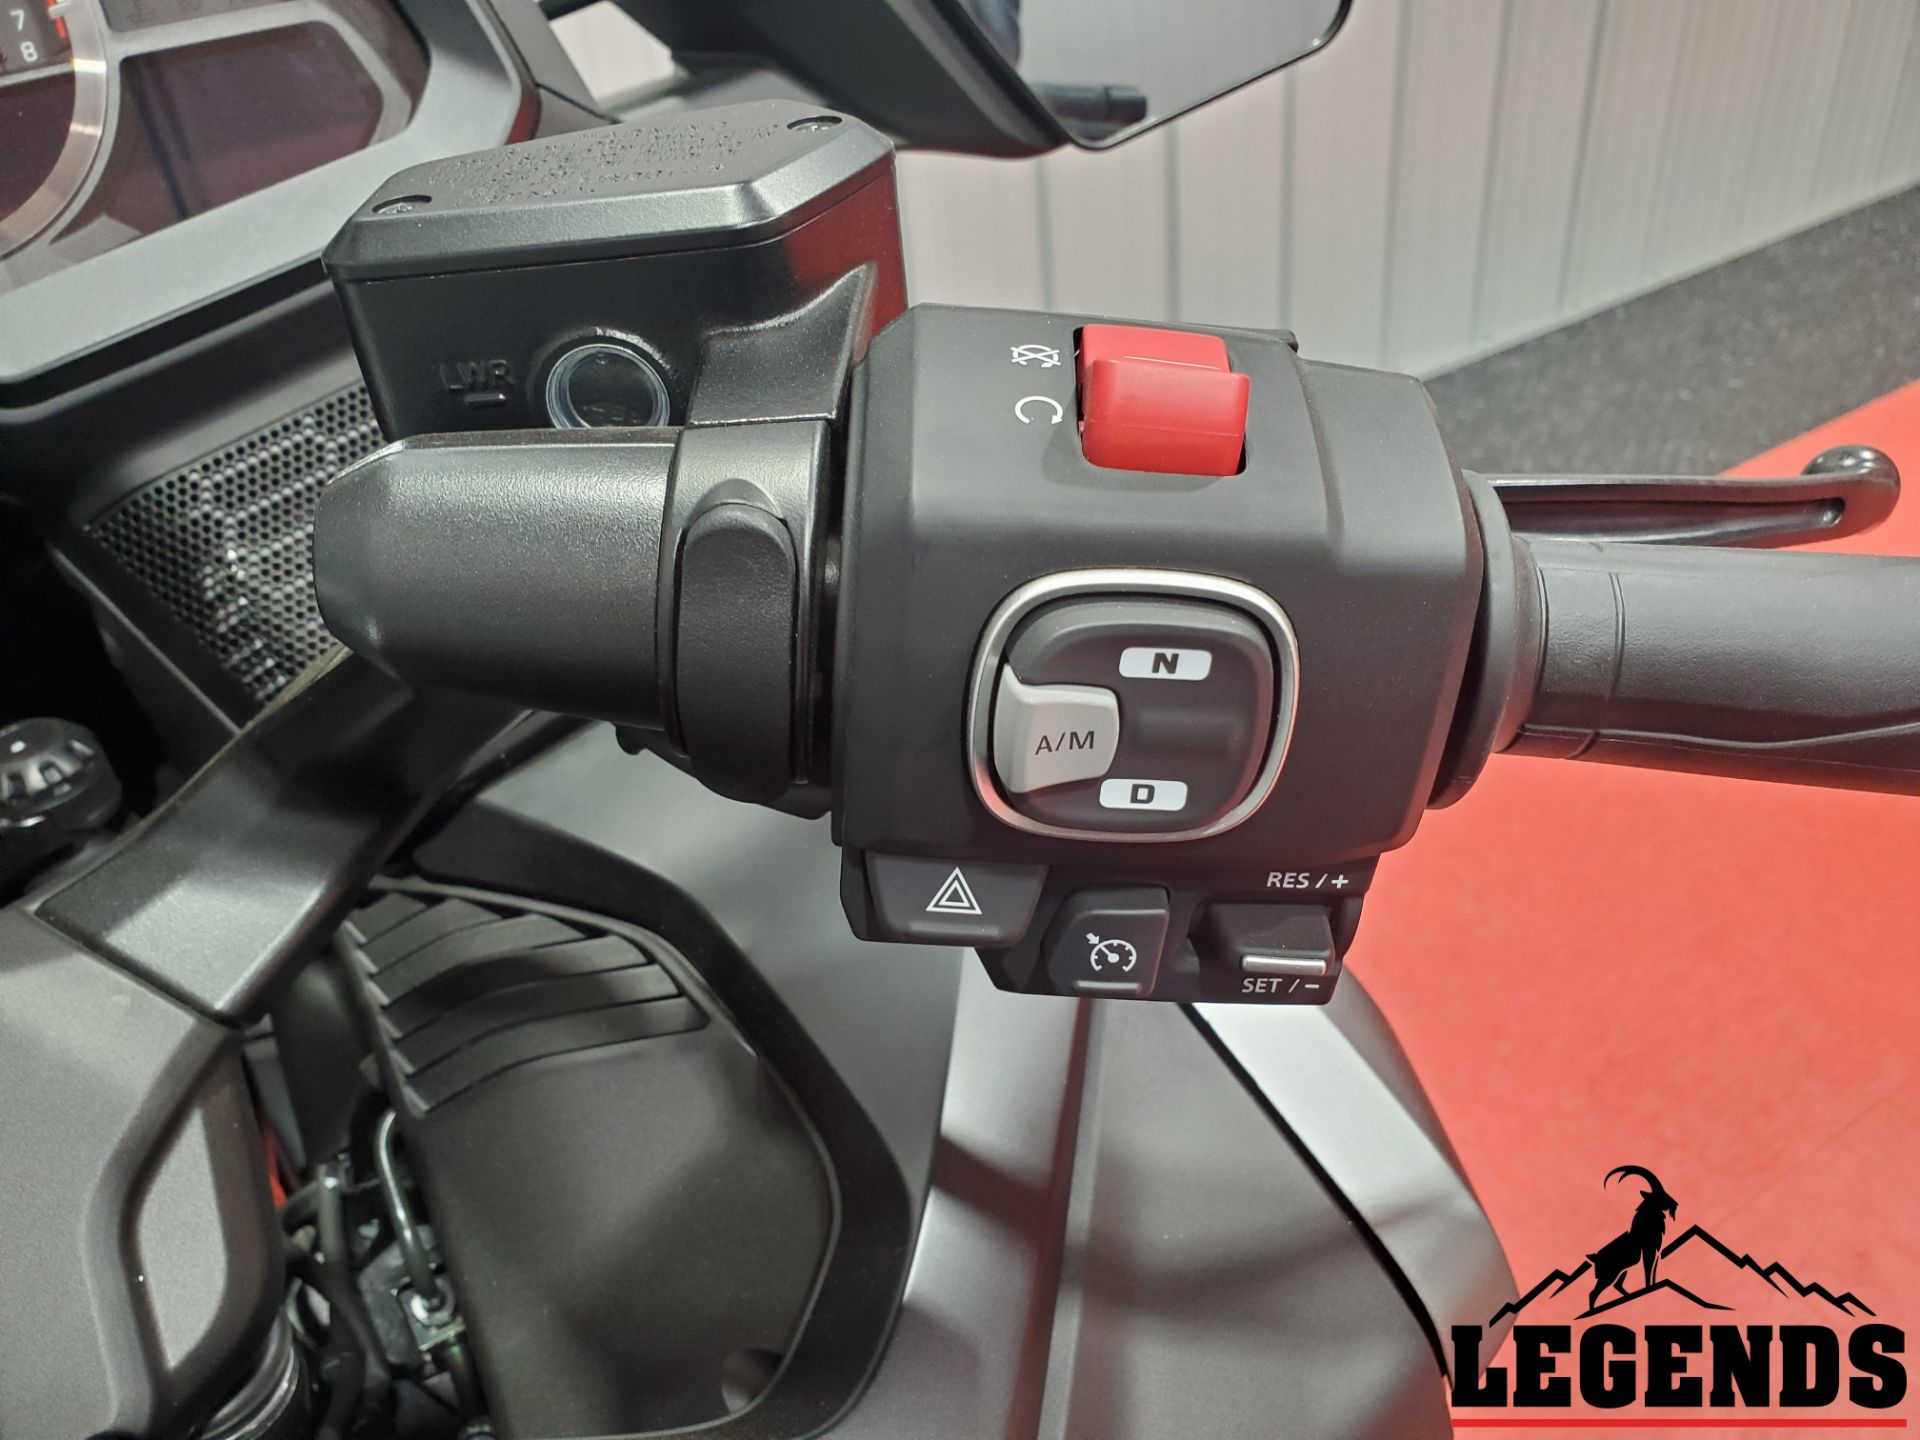 2023 Honda Gold Wing Automatic DCT in Brockway, Pennsylvania - Photo 11